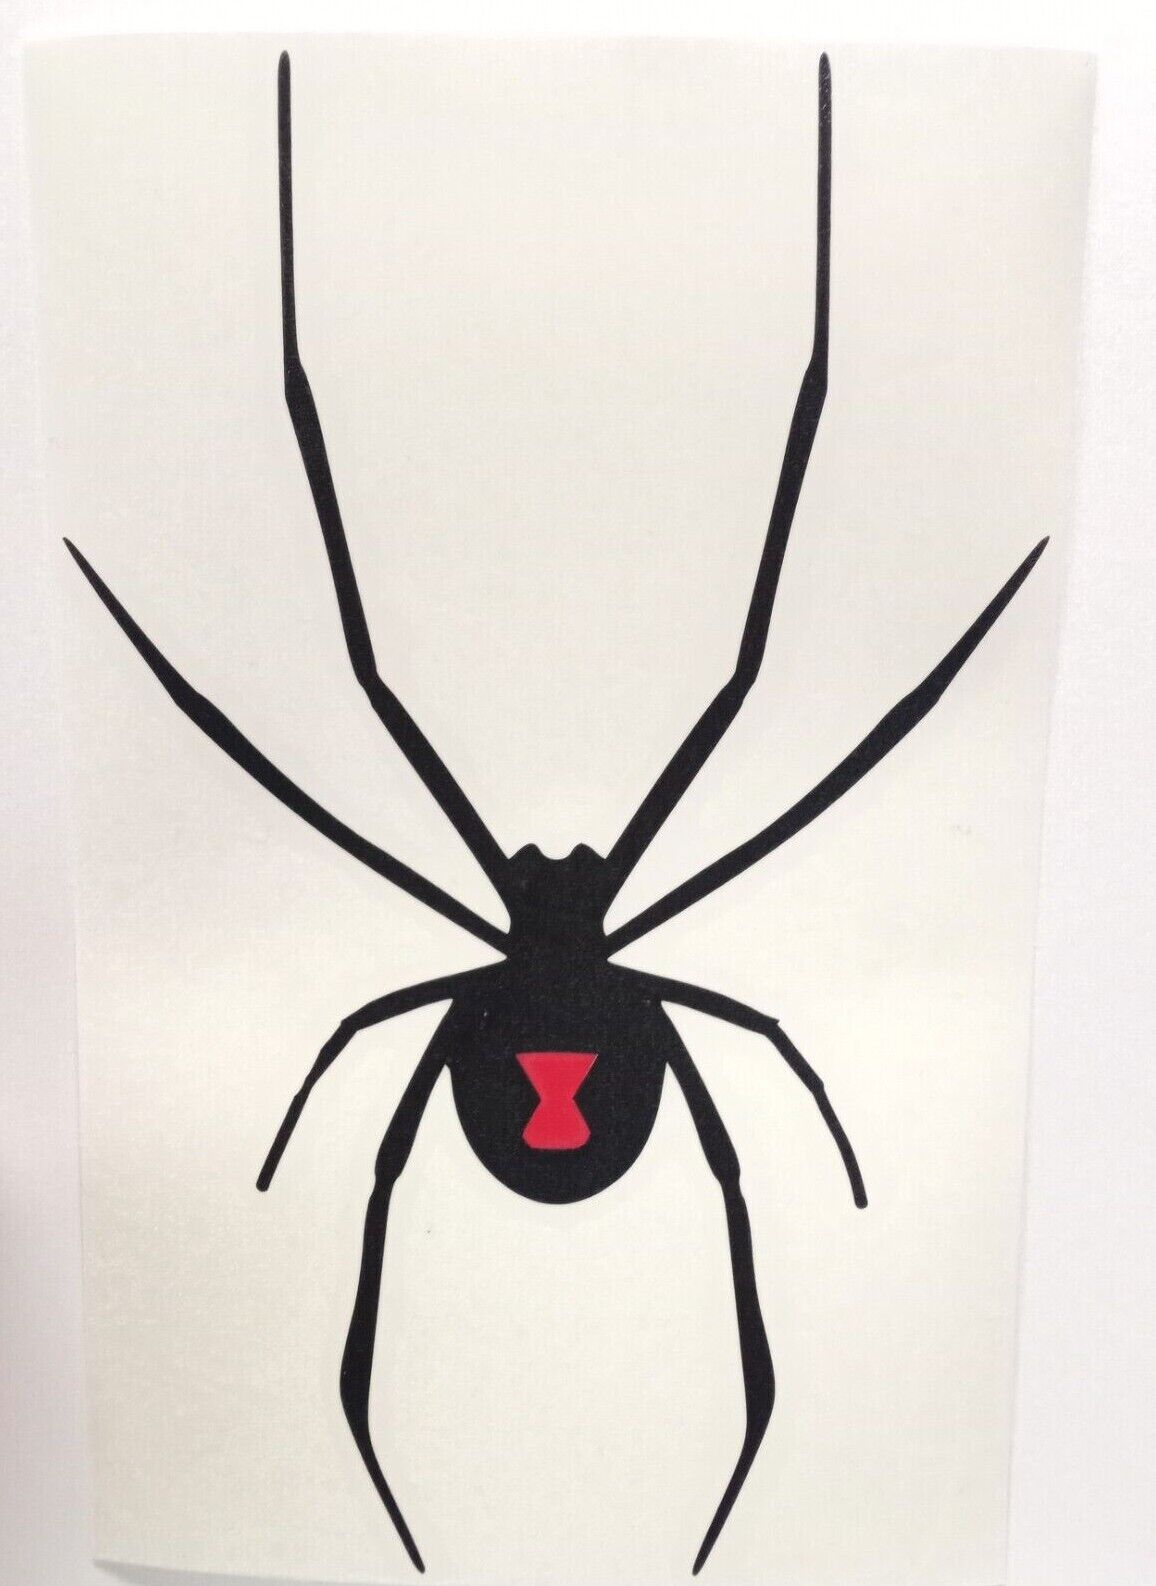 Black Widow Spider Vinyl Decal Car Truck SUV Laptop LARGER SIZES NOW AVAILABLE